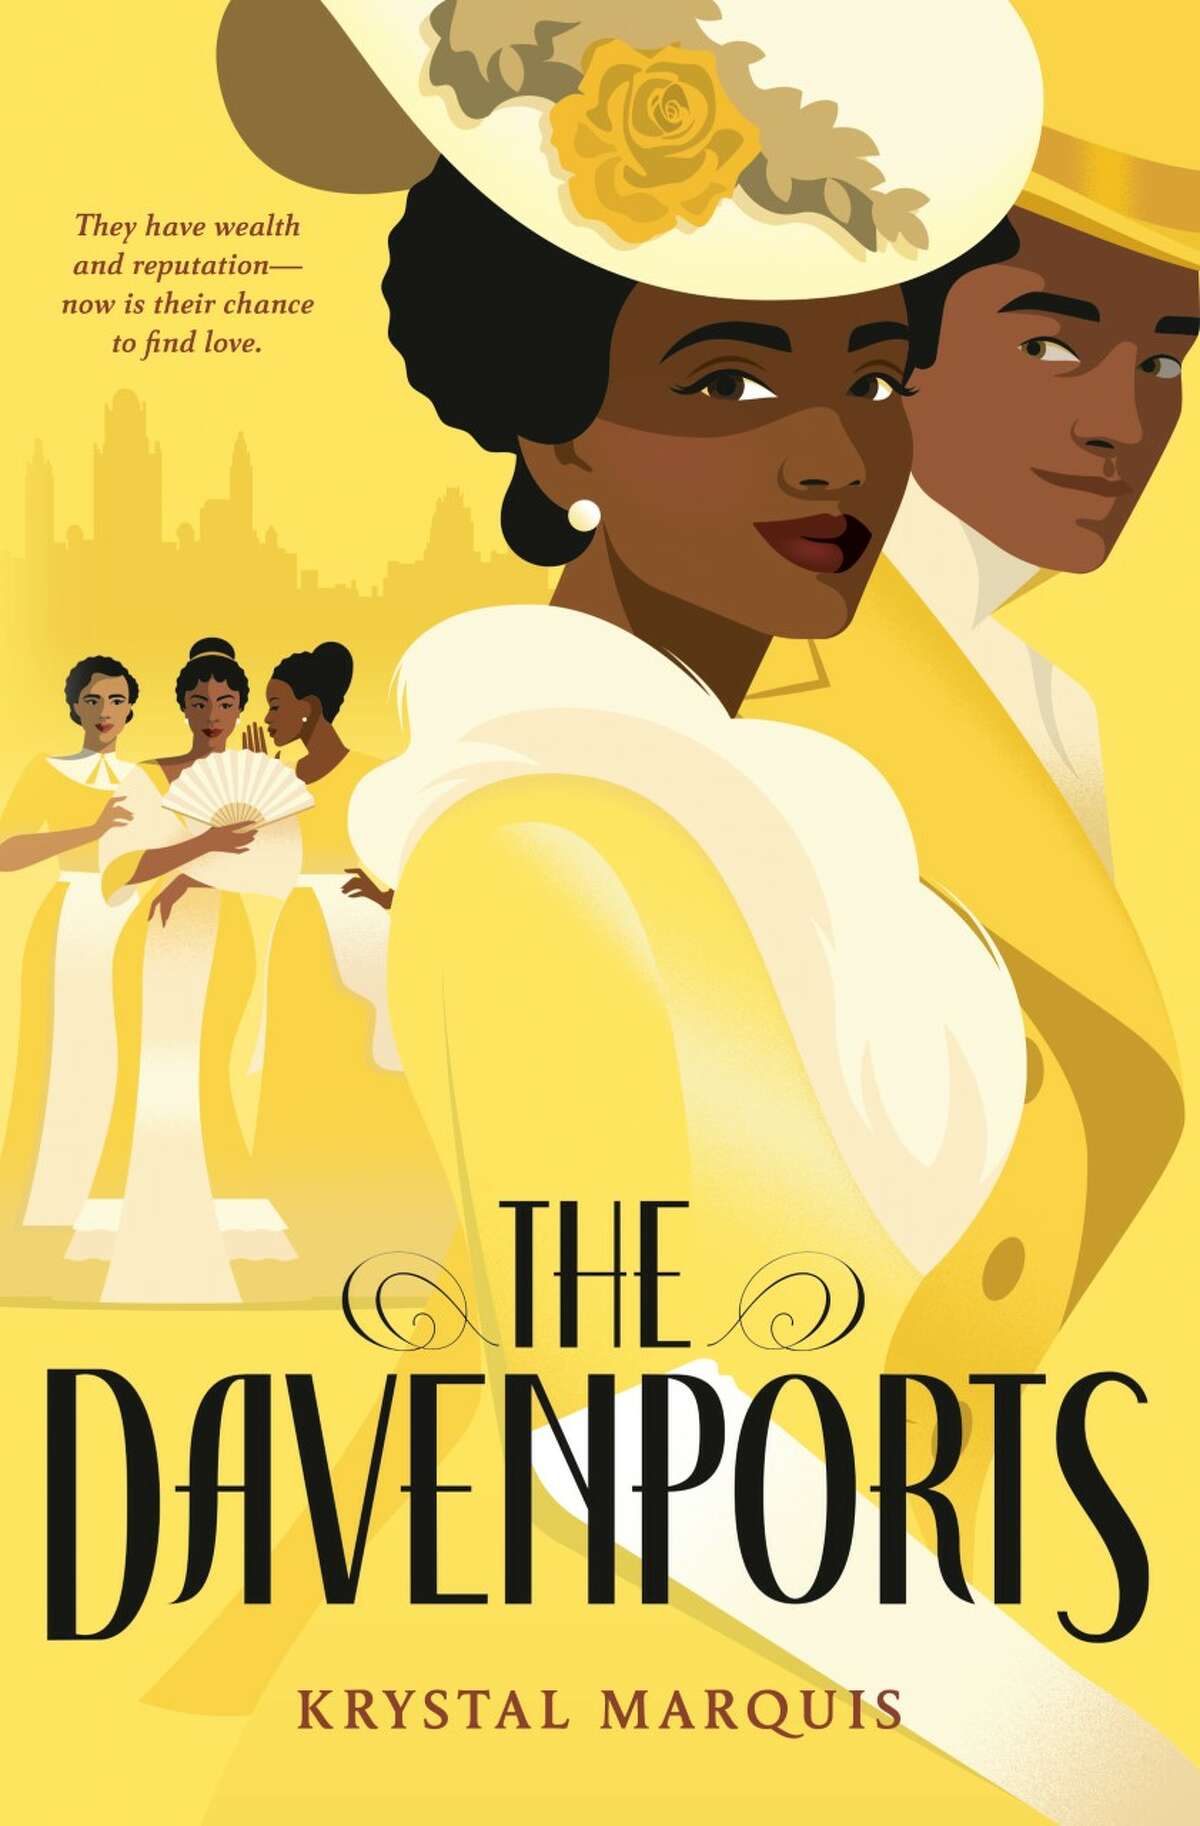 Theresa Evangelista and Deanna Halsall designed the cover of Krystal Marquis' book, "The Davenports." 